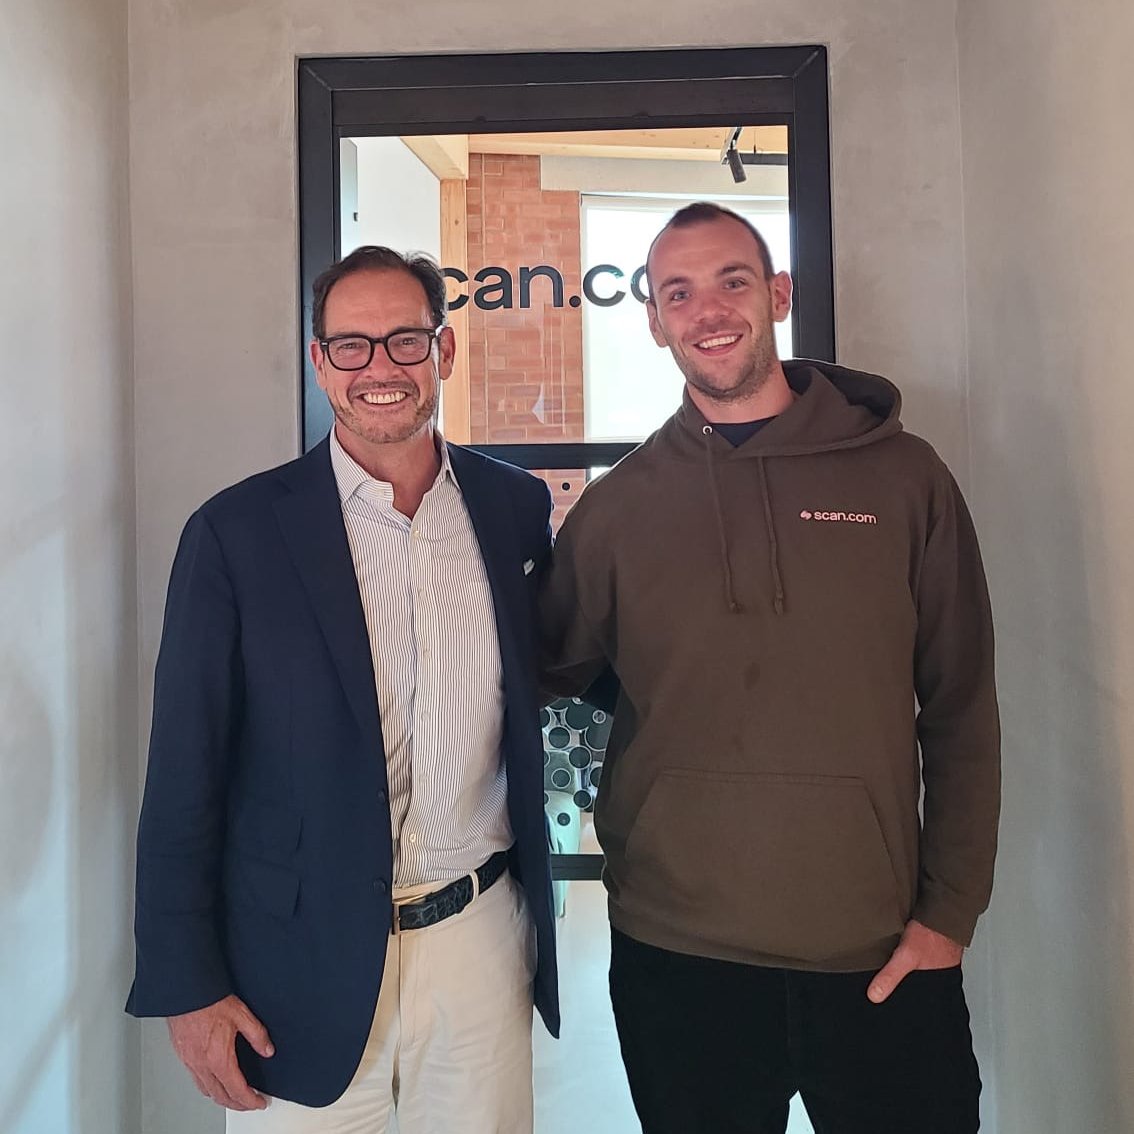 Our Founder & CEO @reidzeis is at @scandotcom_uk's HQ in London w/ @ukcharliee promoting our mission to make sure that every person, injured through no fault of their own, gets access to the quality medical care they deserve. #DontJustSettleGain